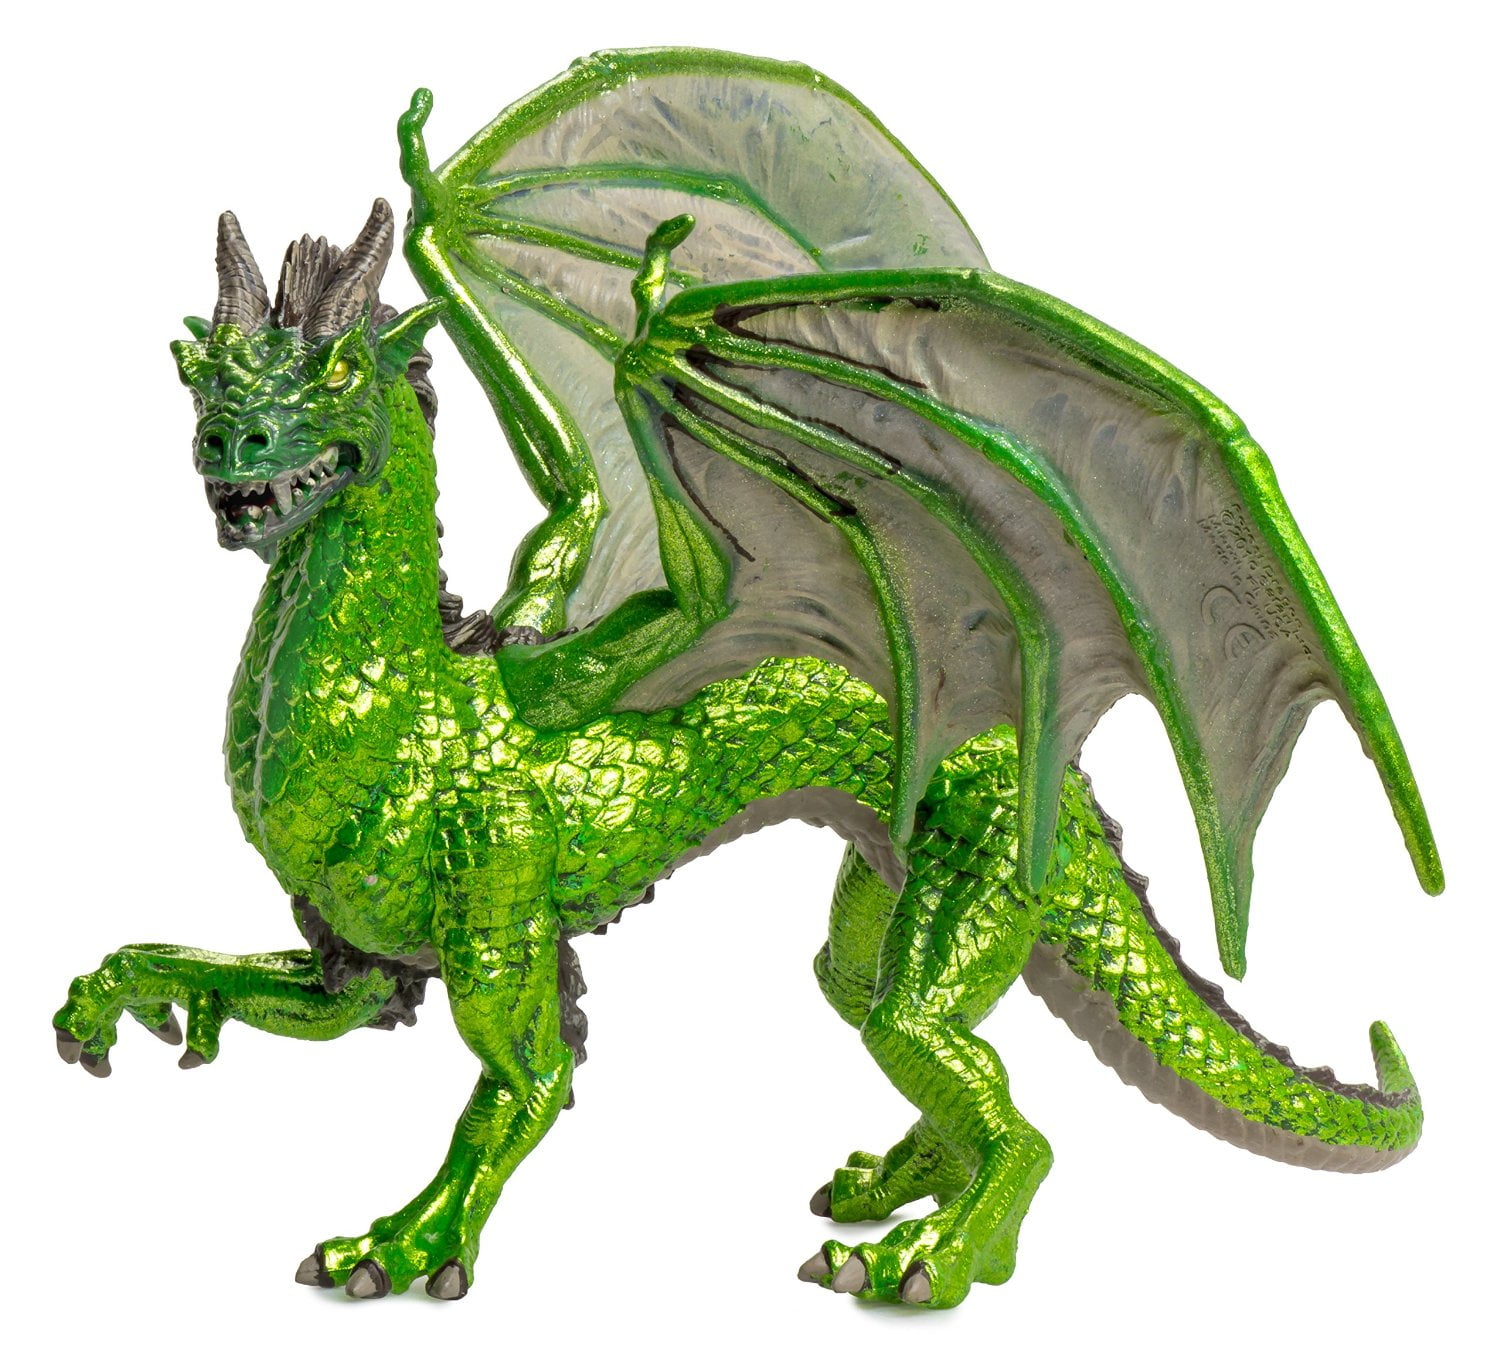 Safari Ltd Glow-in-the-Dark Snow Dragon Realistic Hand Painted Toy Figurine for 